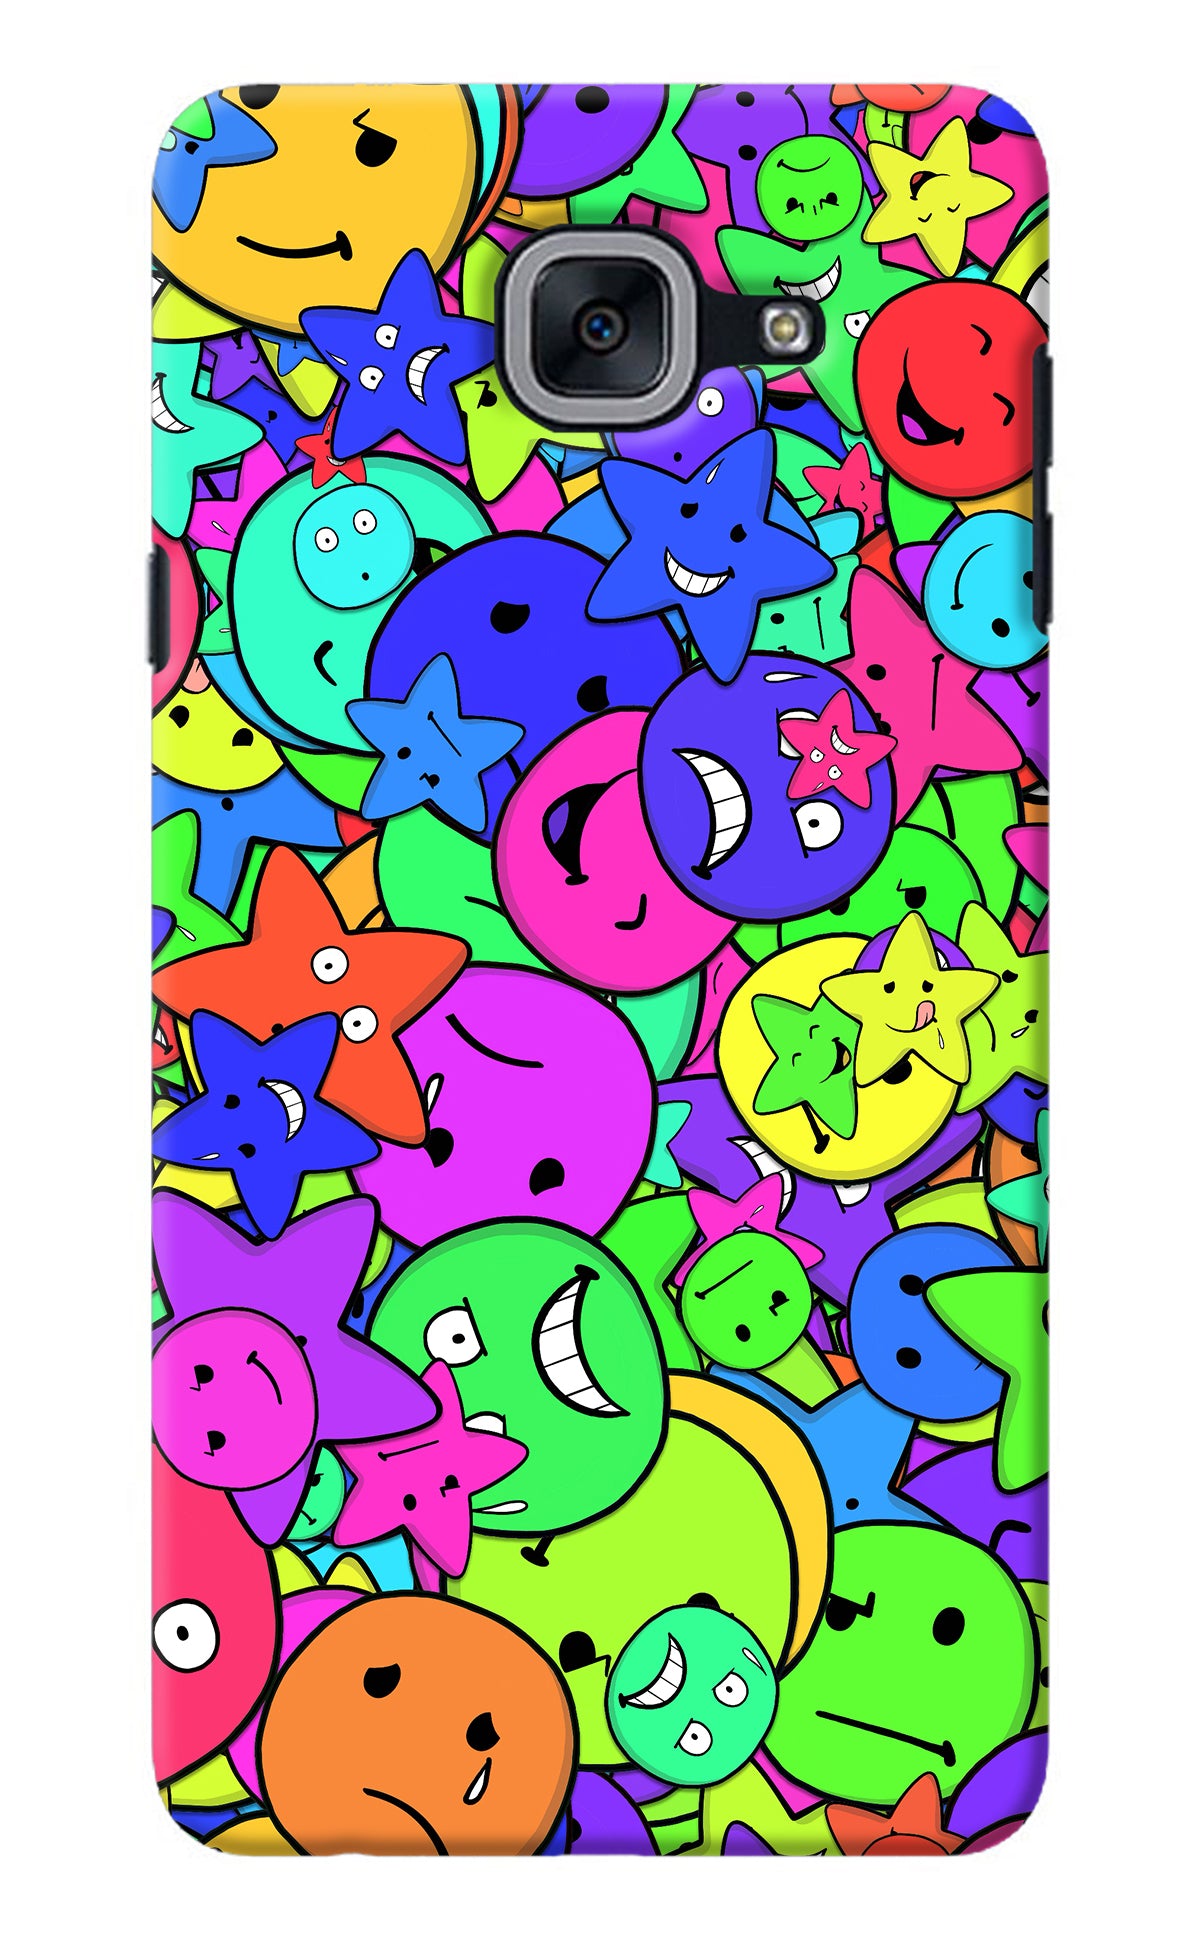 Fun Doodle Samsung J7 Max Back Cover